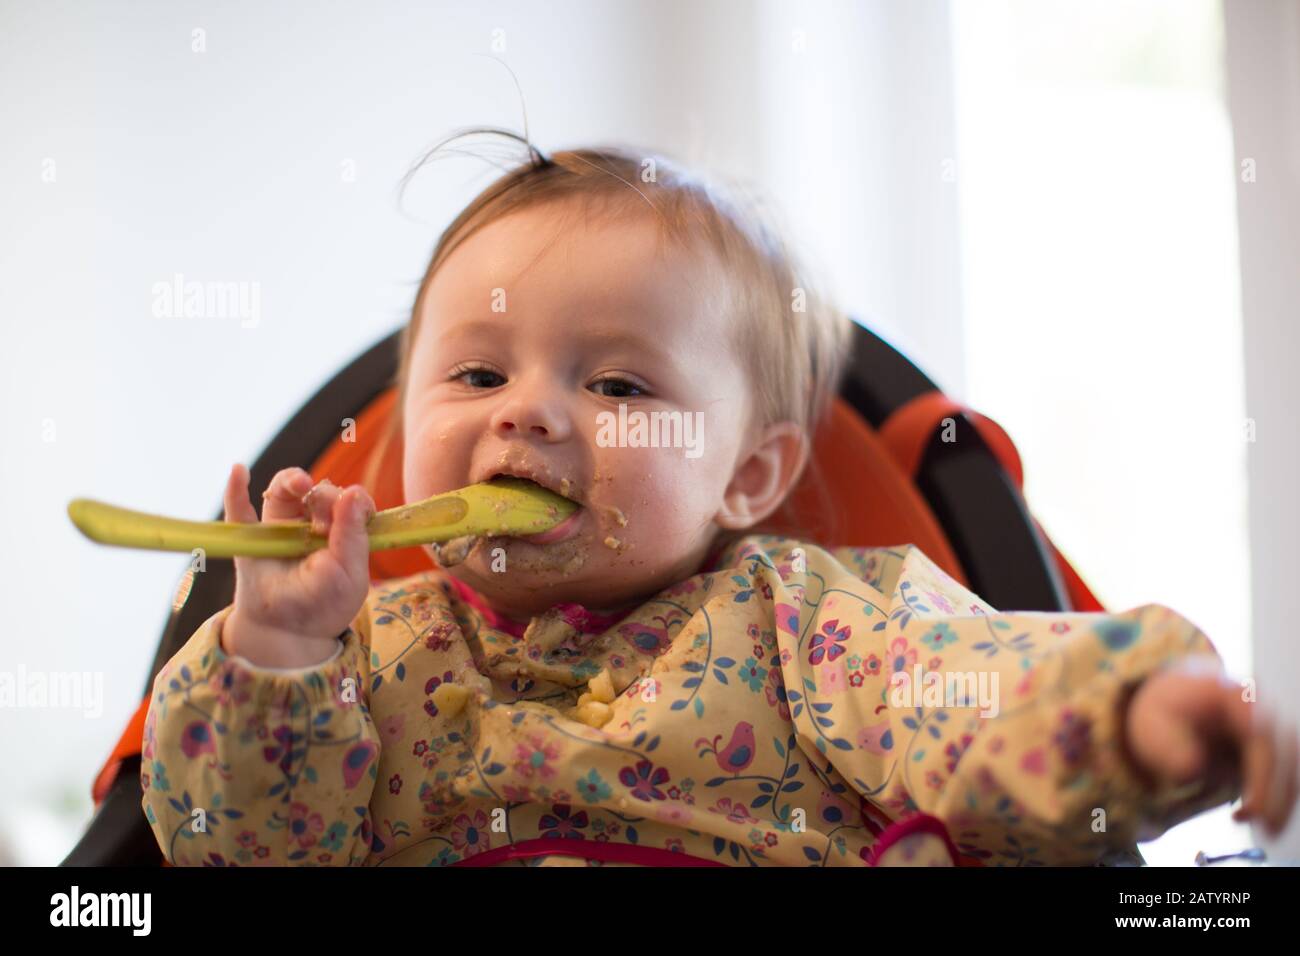 8 month old baby girl eating food Stock Photo